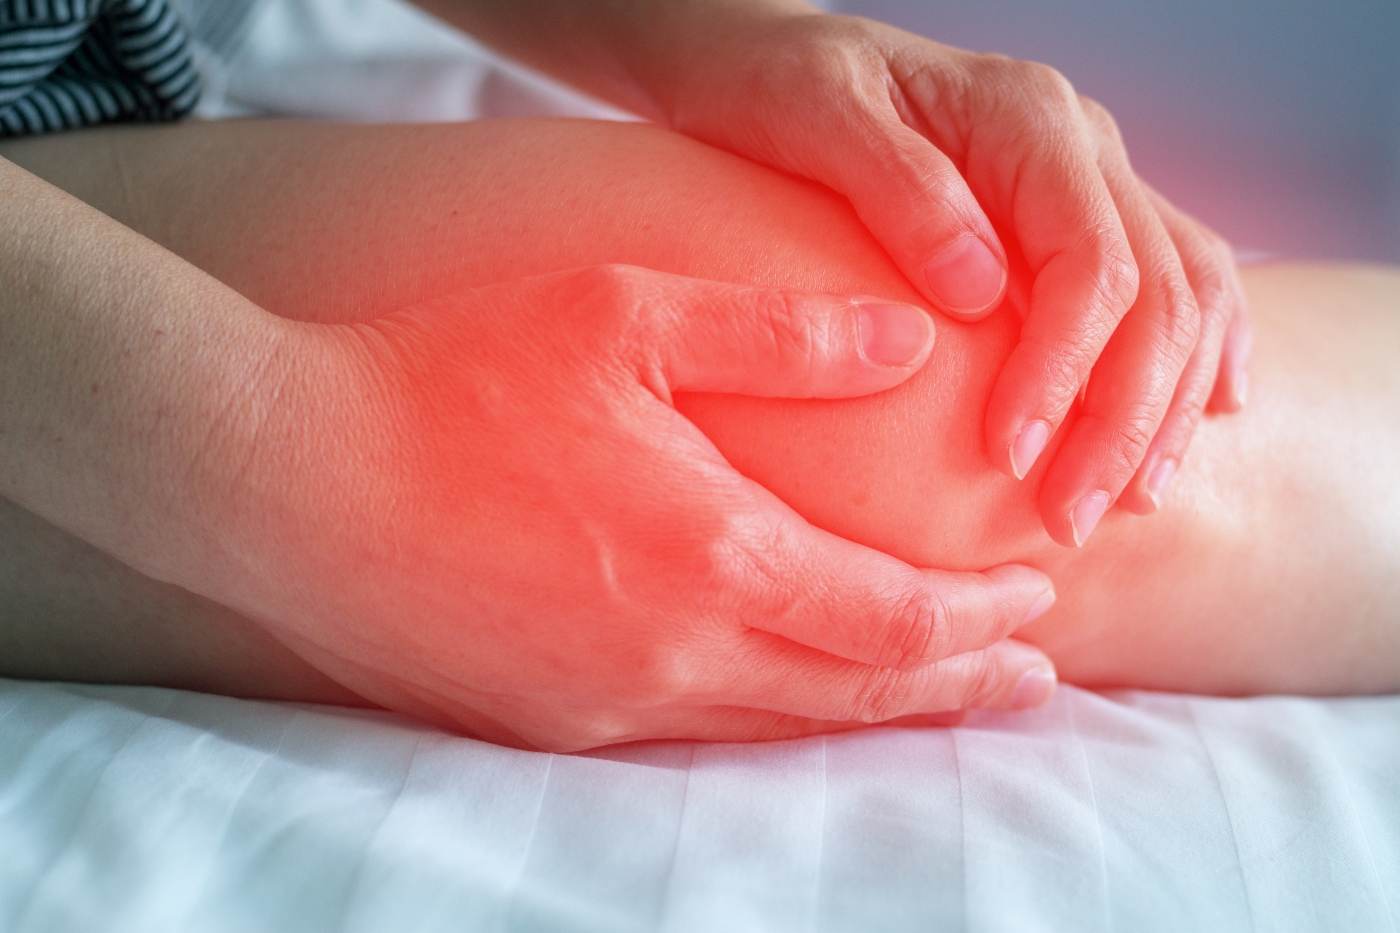 What’s a Baker’s Cyst and How’s It Treated?